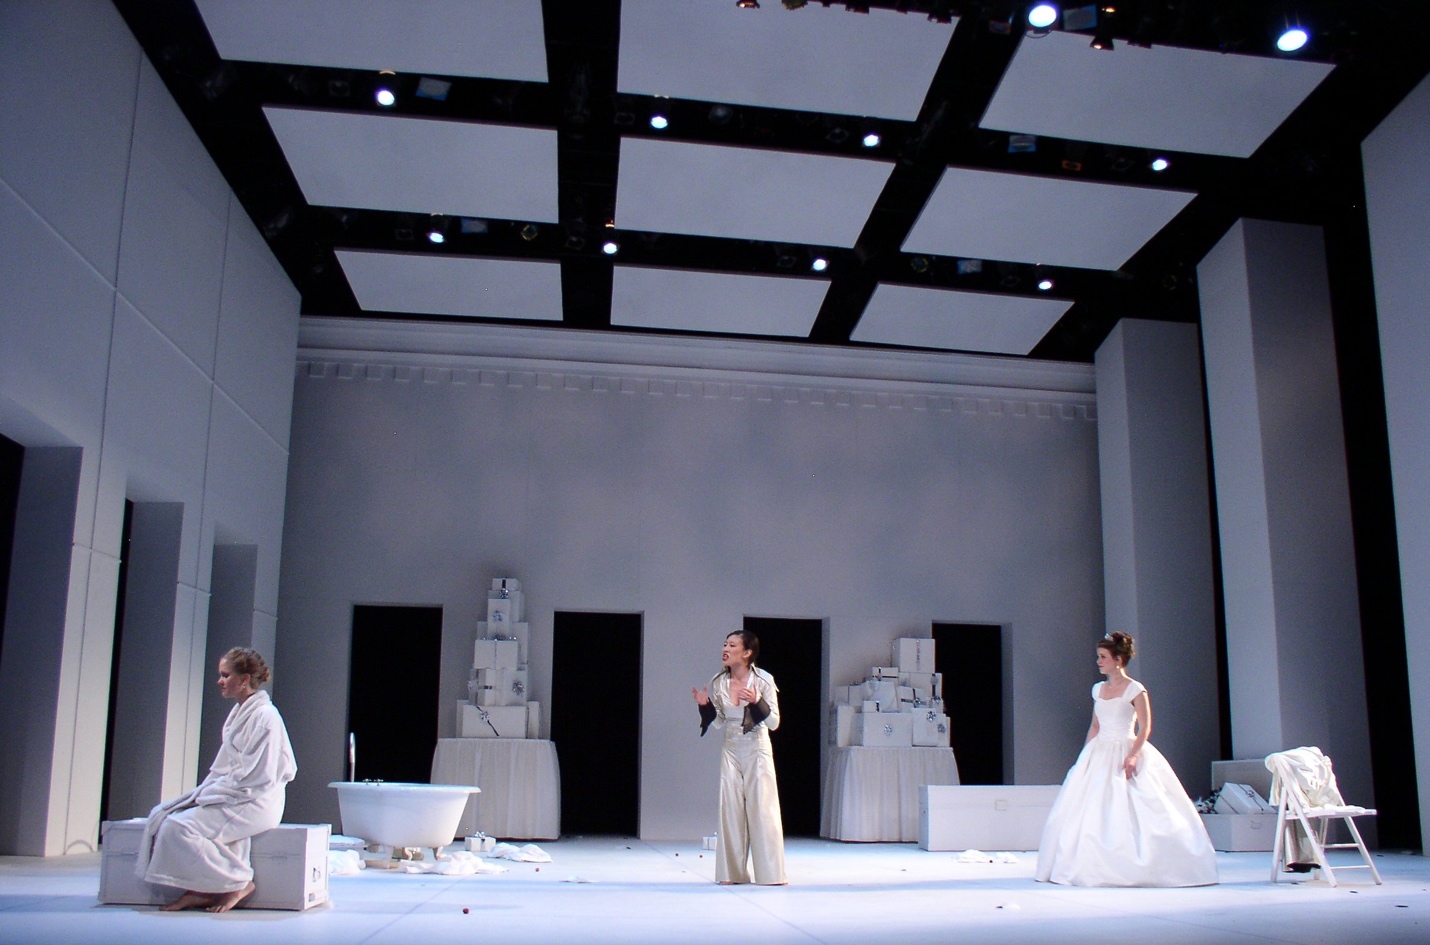 Three actors on a stage made up of white walls. Passageways are evenly spaced along the back wall and the wall on the left side of the stage. Three actors stand equally distant from one another across the stage. They wear white costumes.